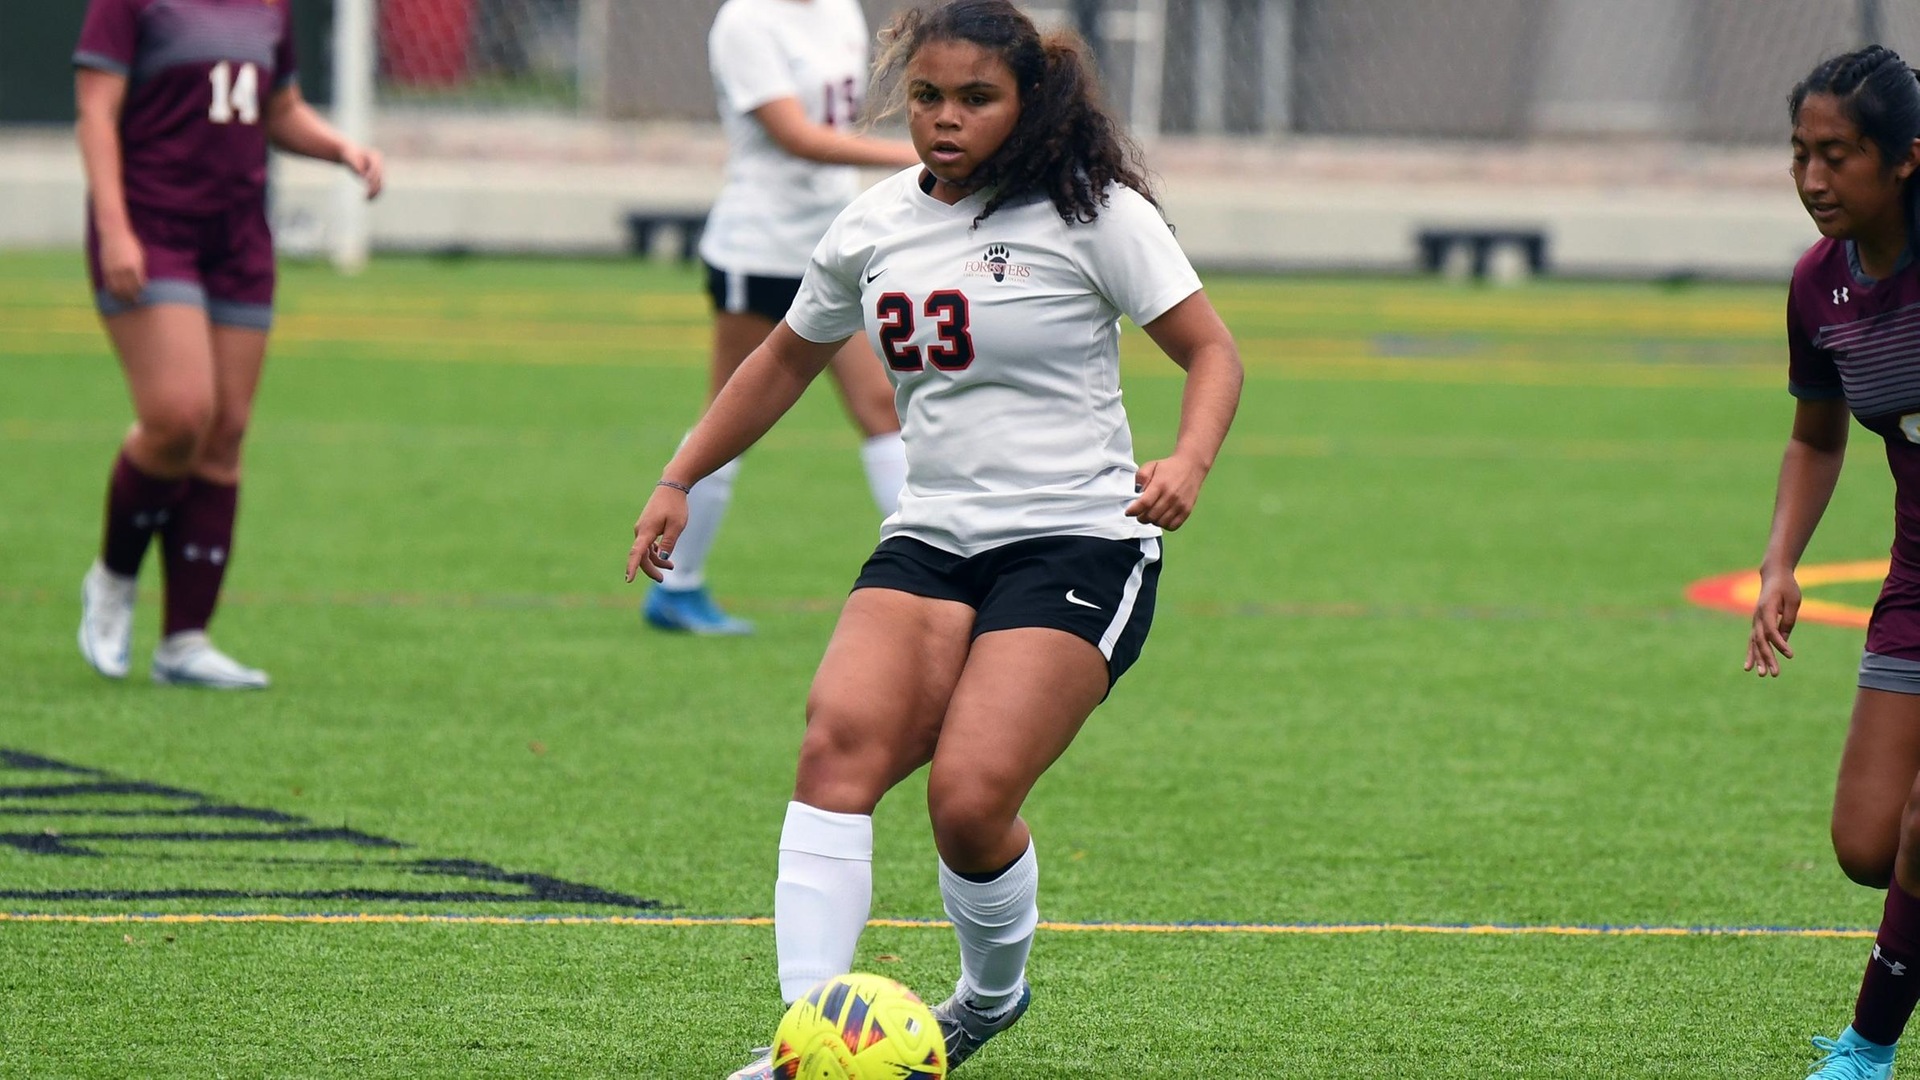 Foresters Score Four in Second Half, Defeat Bluejays 5-0